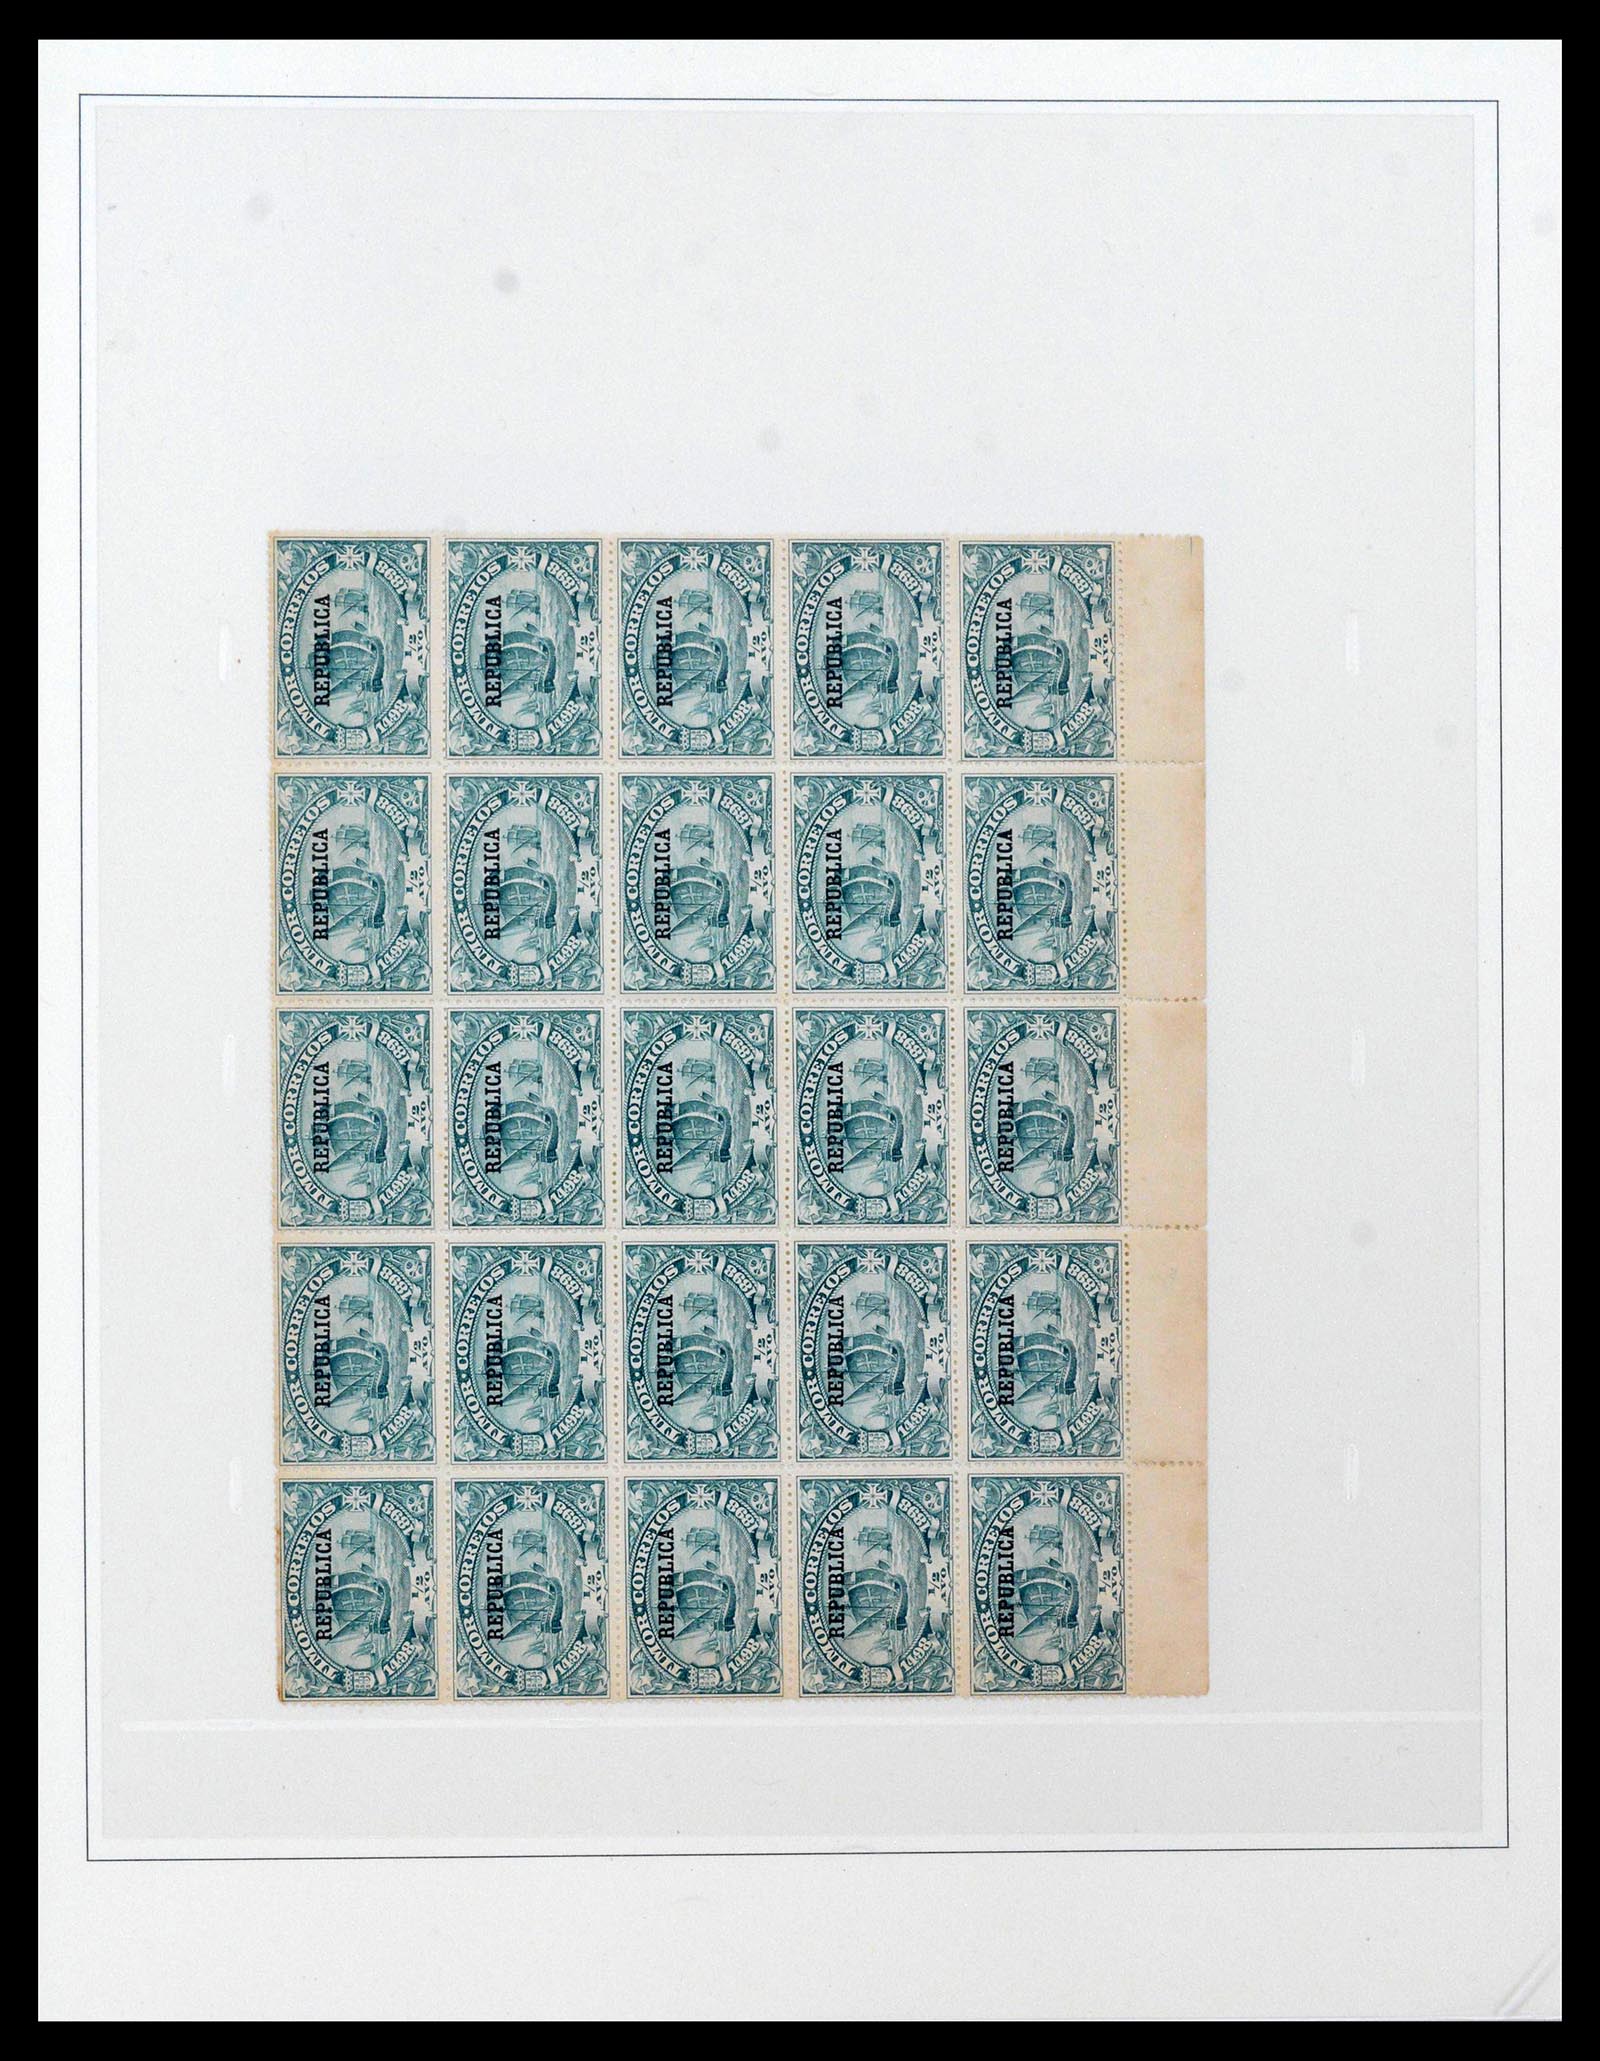 38750 0723 - Stamp collection 38750 SUPER collection Portuguese colonies 1870-1974.